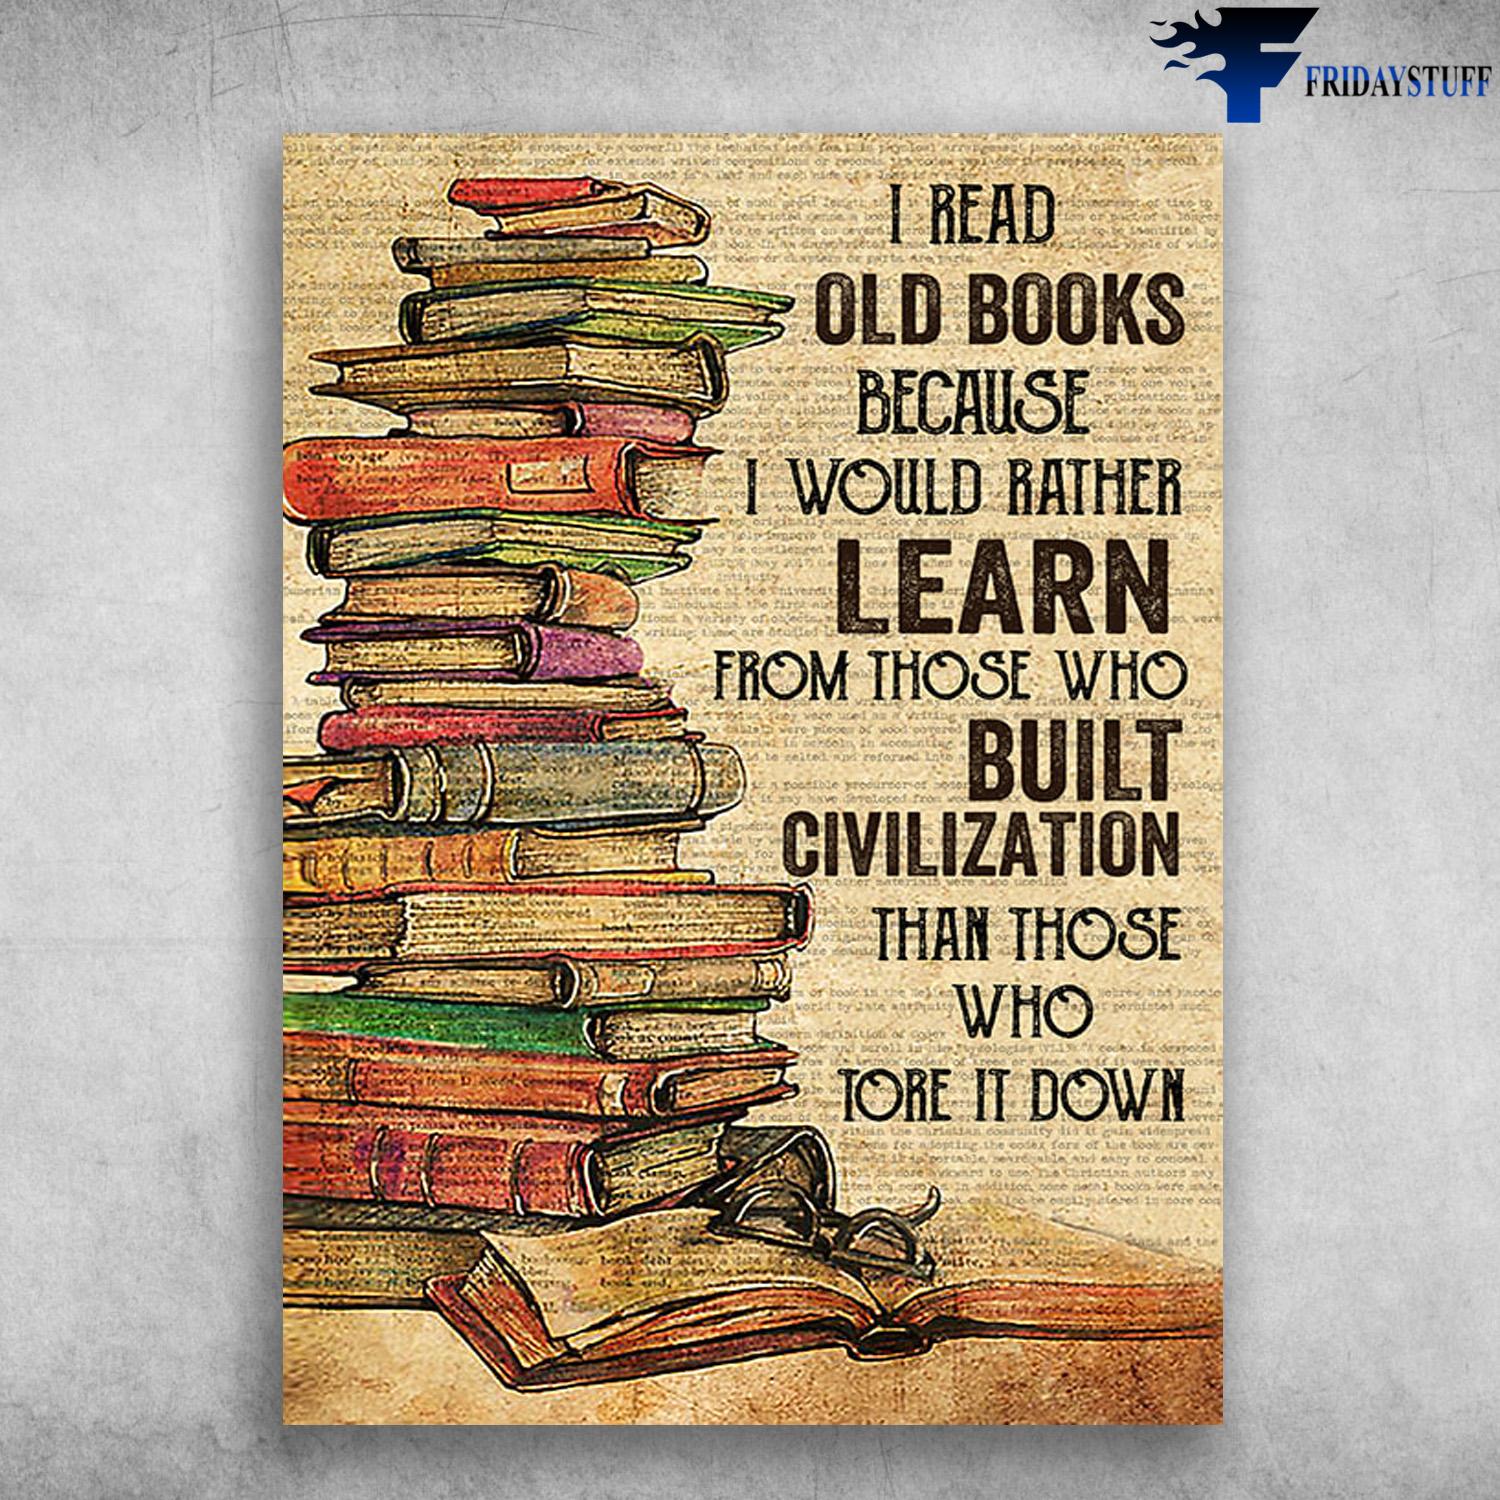 Book Lover, Book Reader, I Read Old Books, Because I Would Rather Learn, From Those Who Built Civilization, Than Those Who Tore It Down